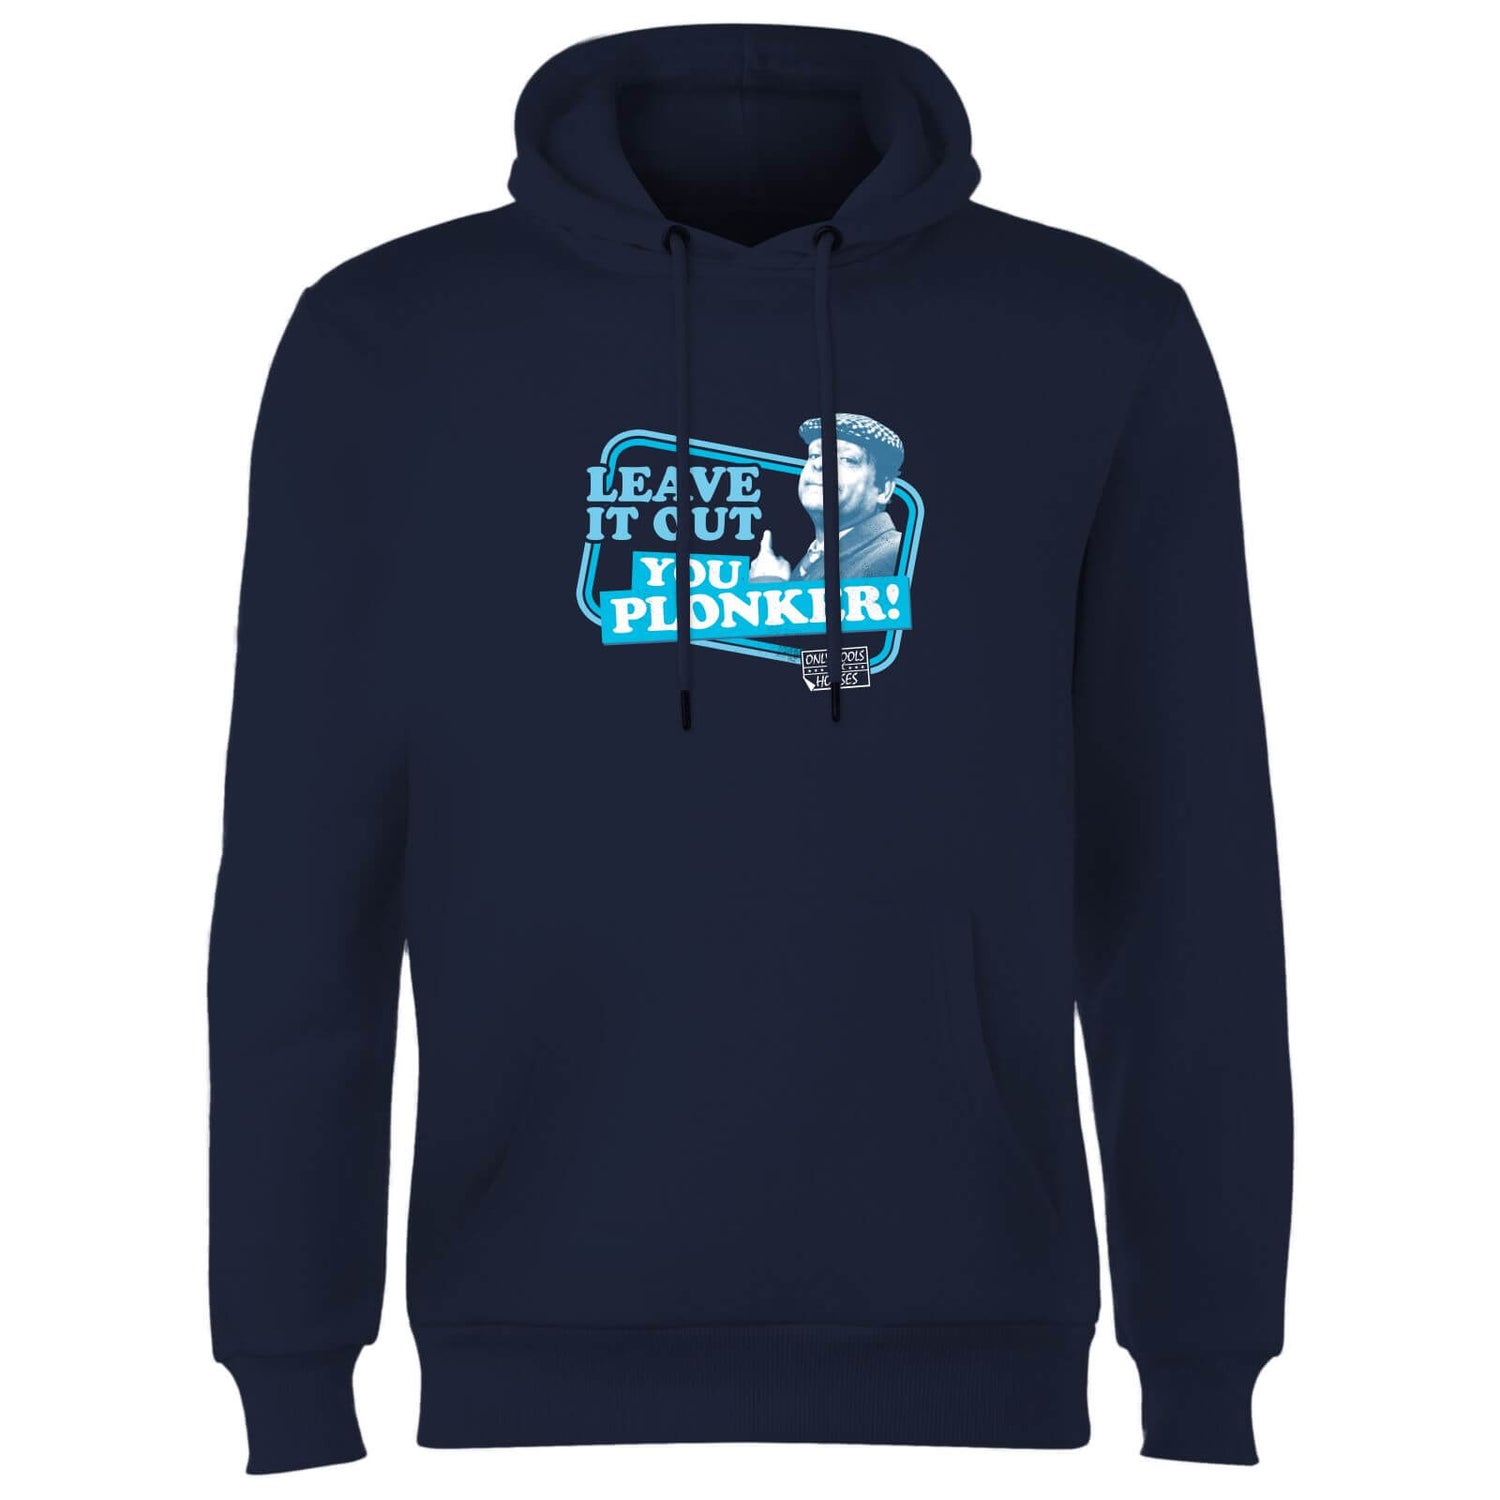 Only Fools And Horses Leave It Out You Plonker! Hoodie - Navy